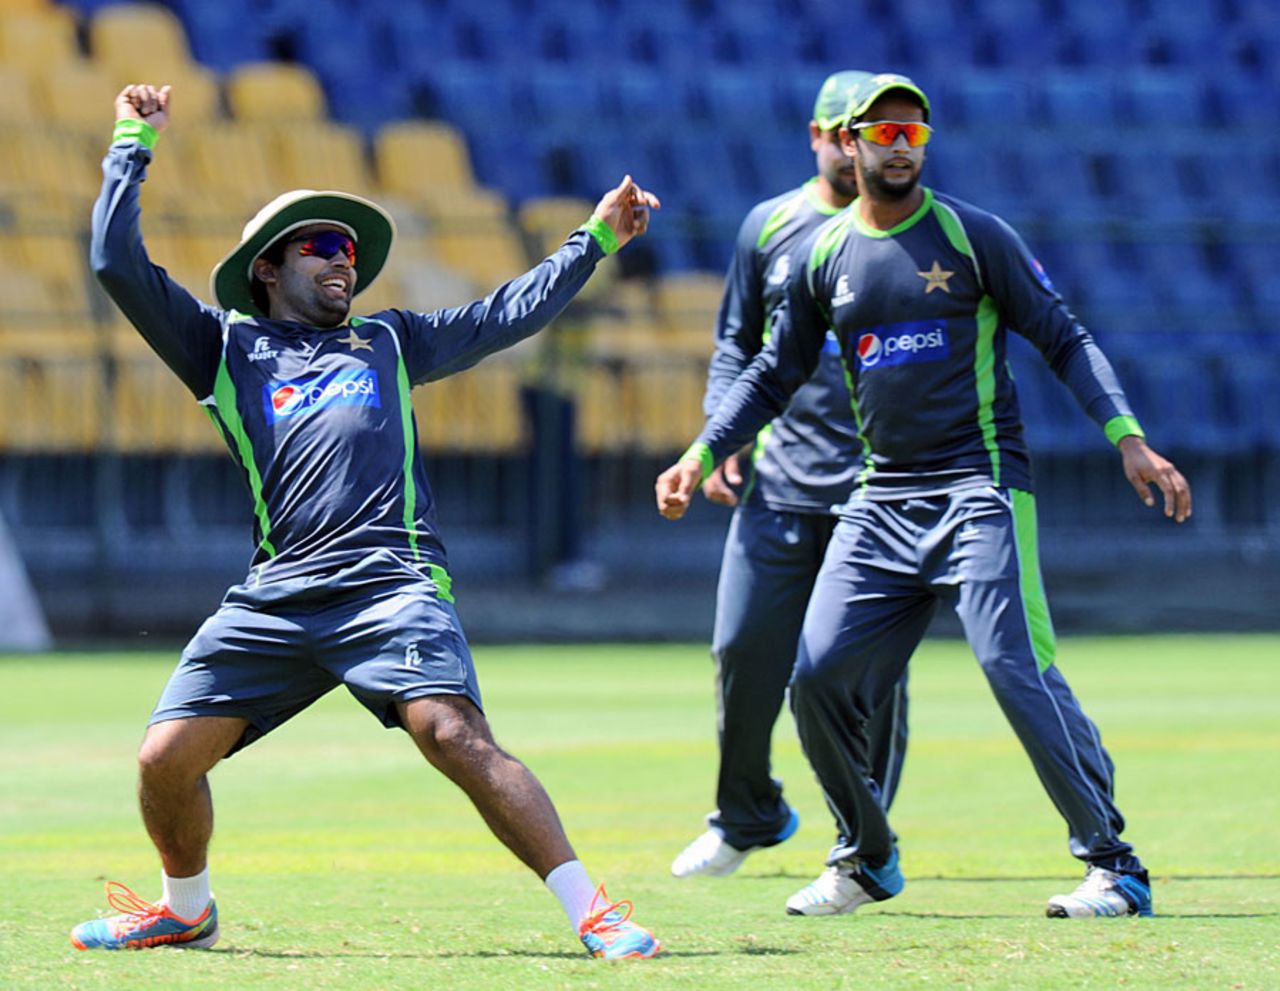 The Pakistan players participate in a fielding drill, Colombo, July 29, 2015